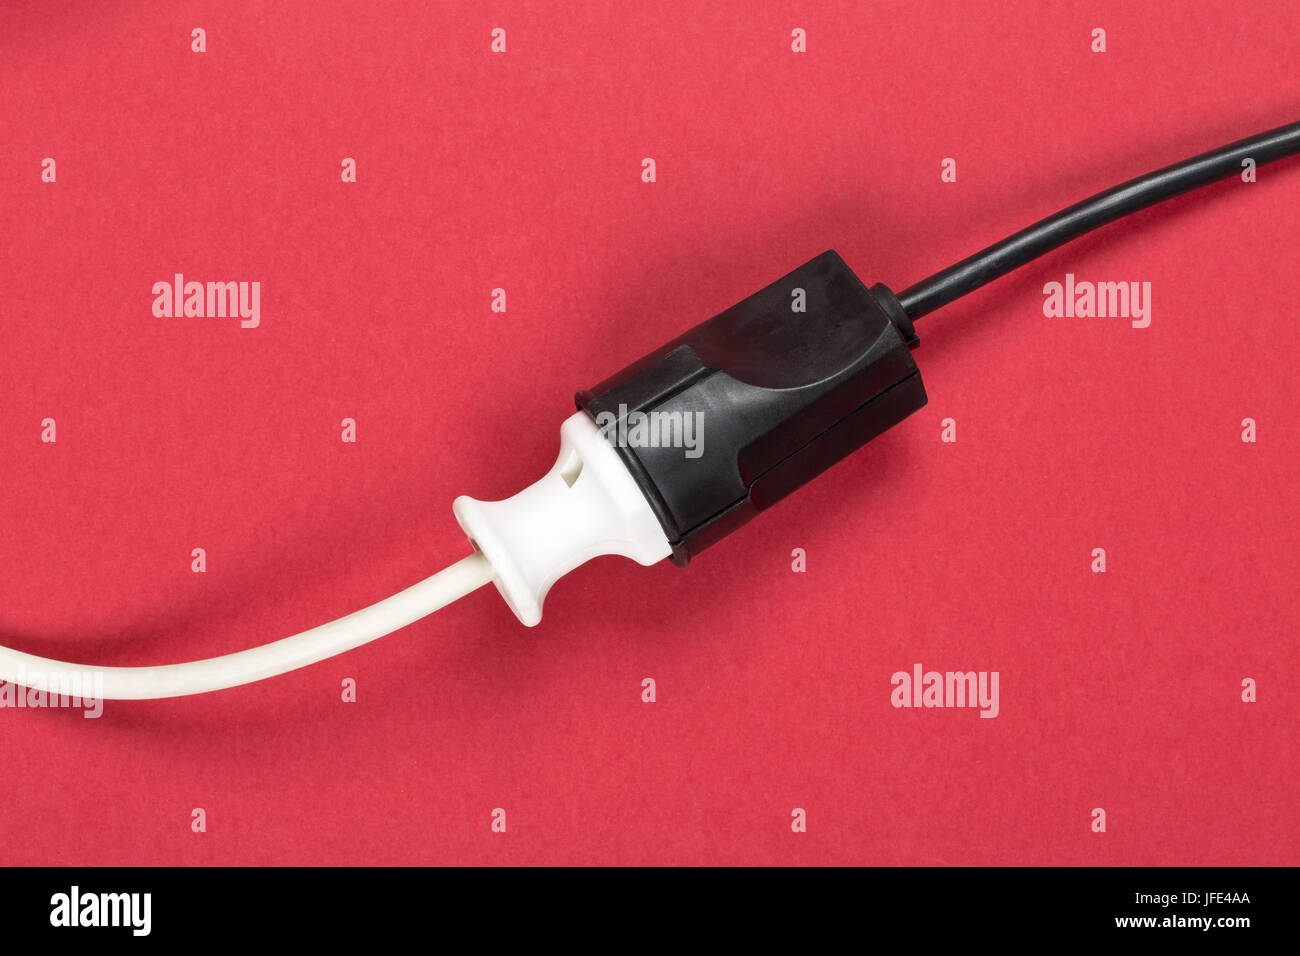 Connected white european power cable plug with black connector cable on red background Stock Photo